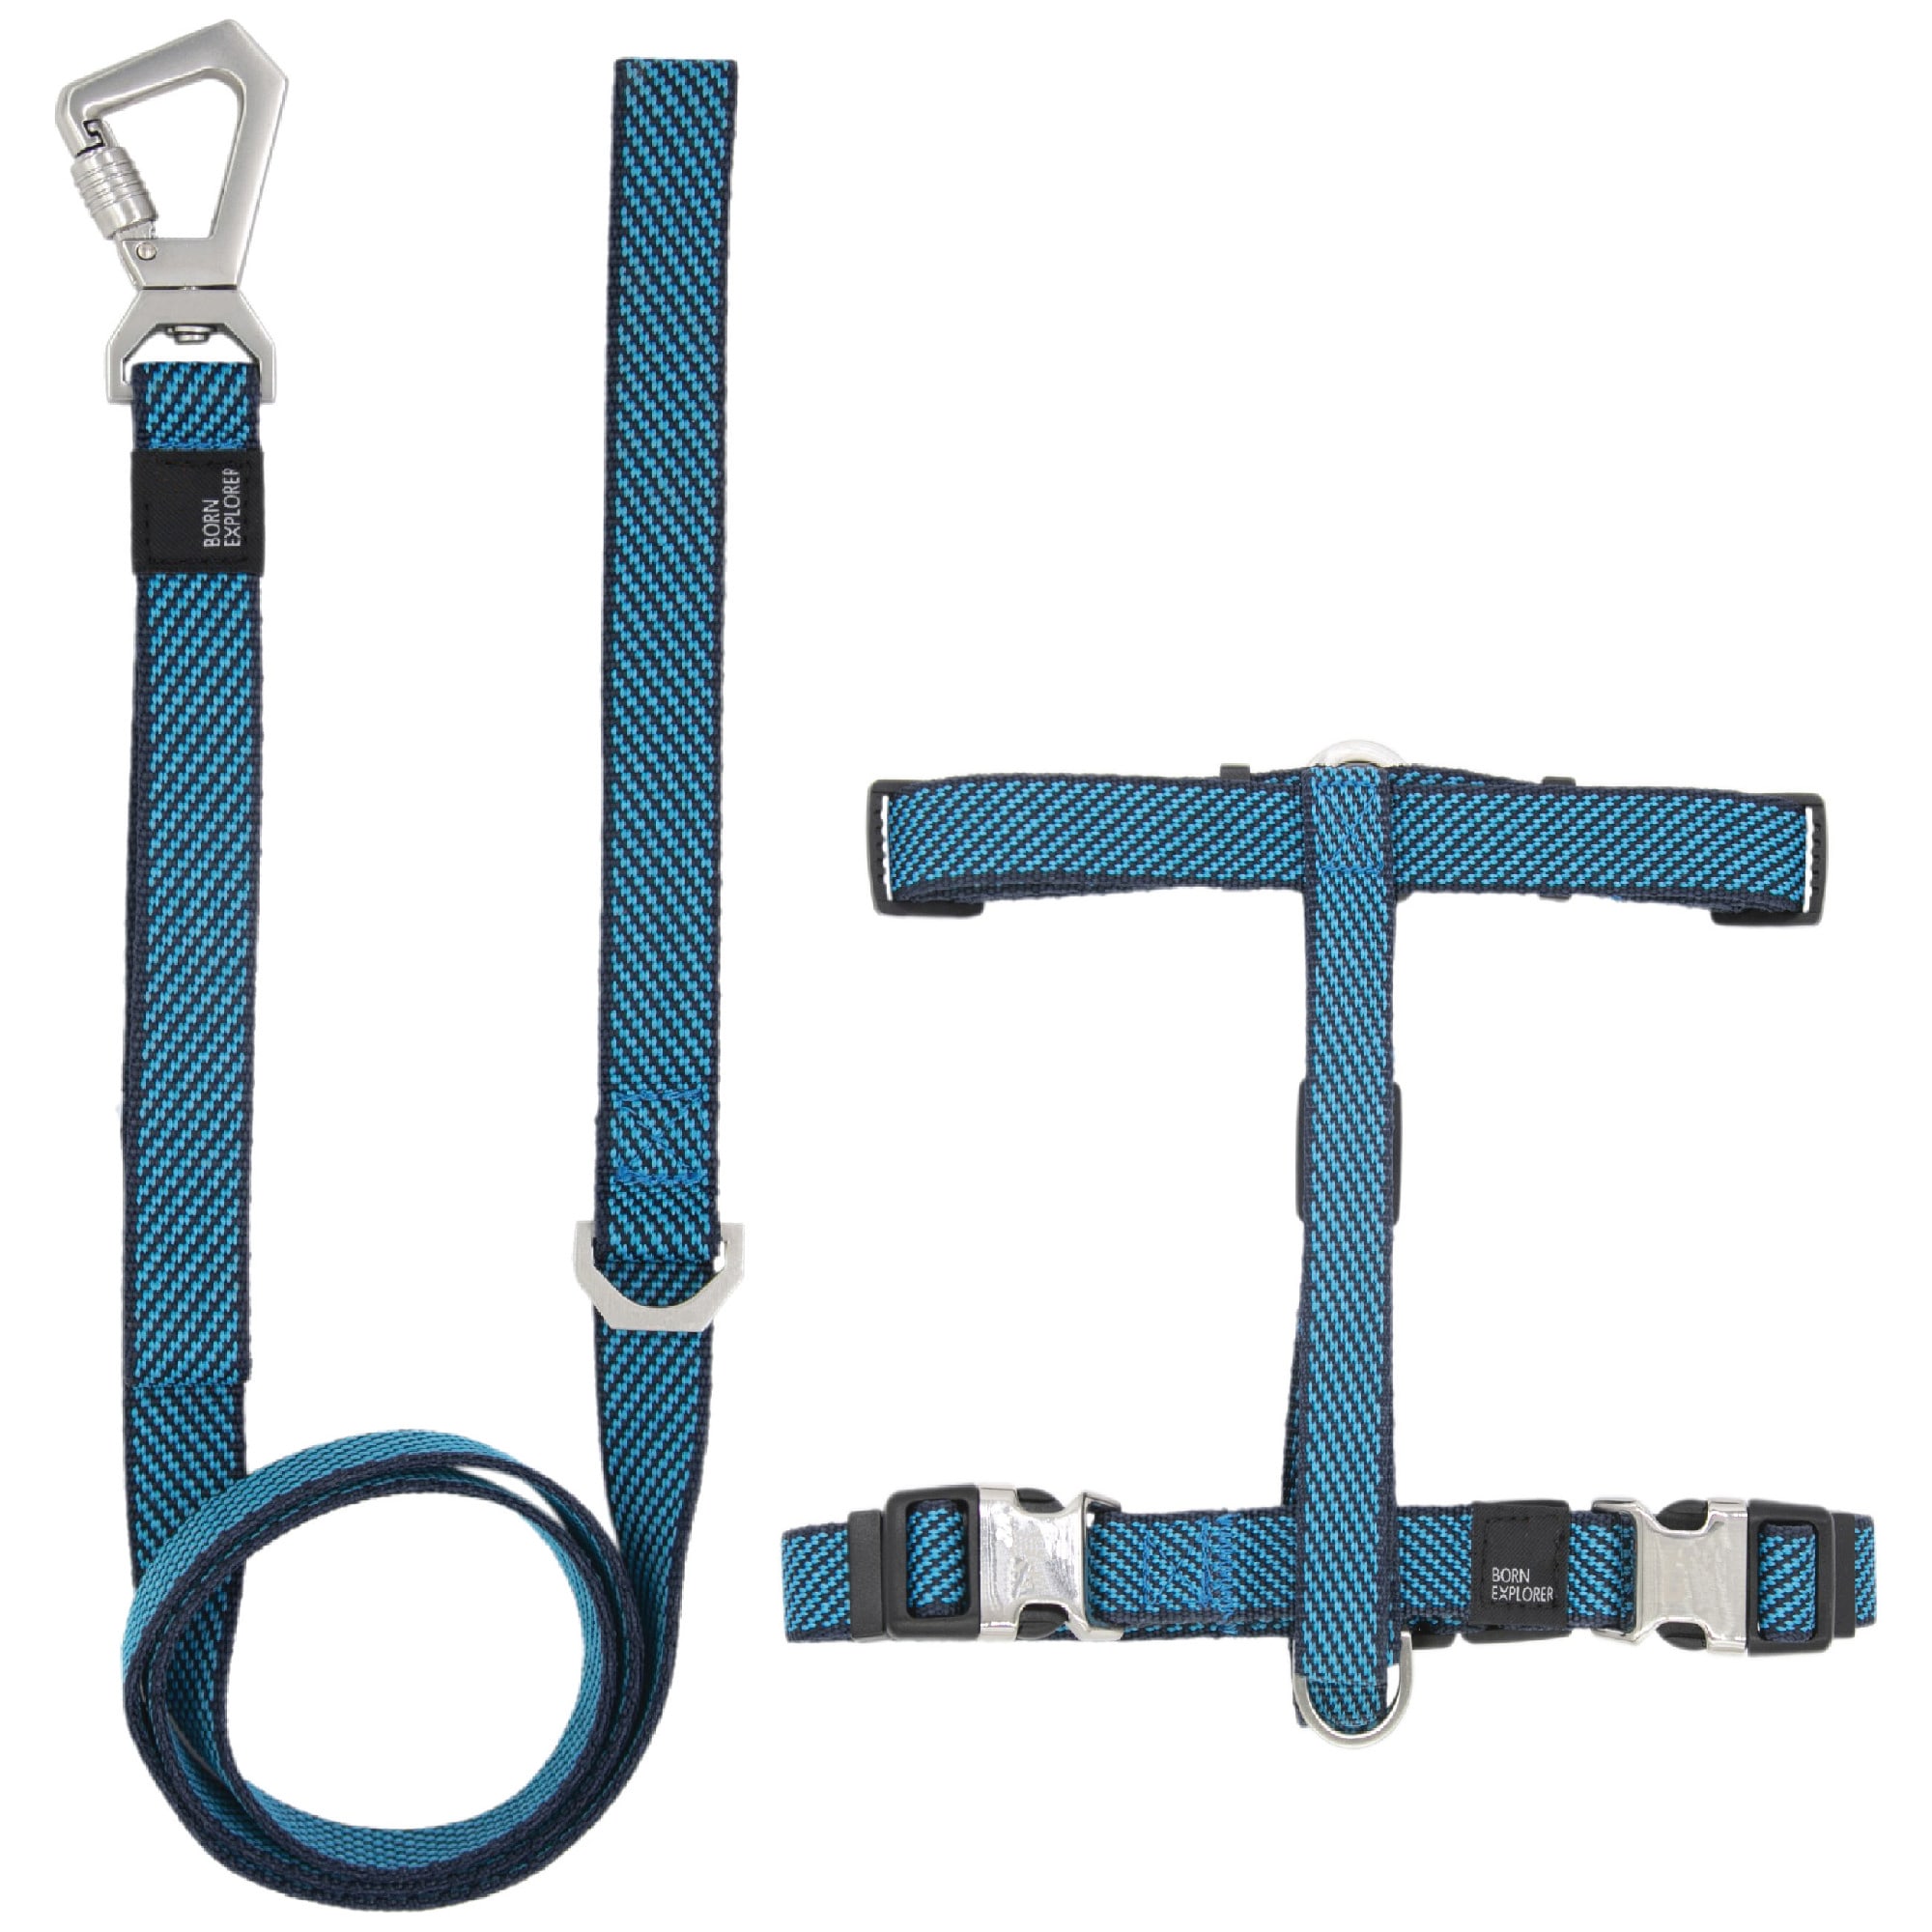 Pet Life ® Luxe 'Houndsome' 2-In-1 Adjustable Designer Dog Harness and Leash  